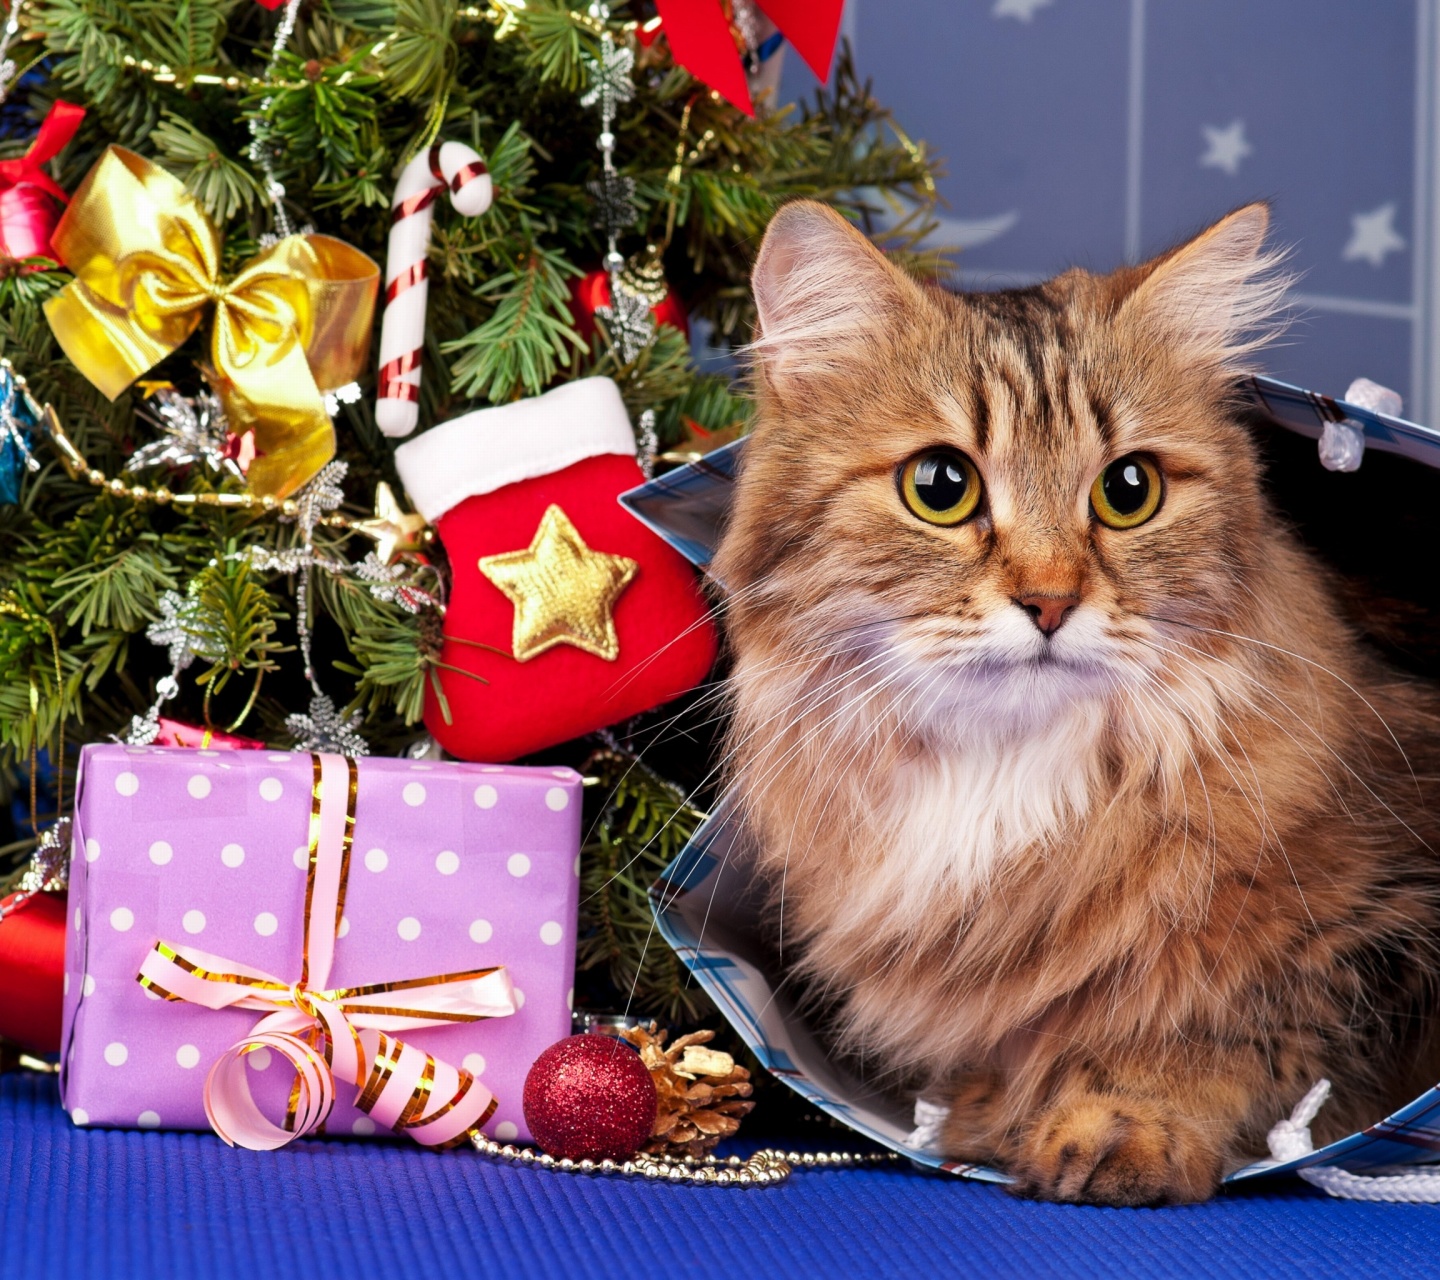 Merry Christmas Cards Wishes with Cat screenshot #1 1440x1280